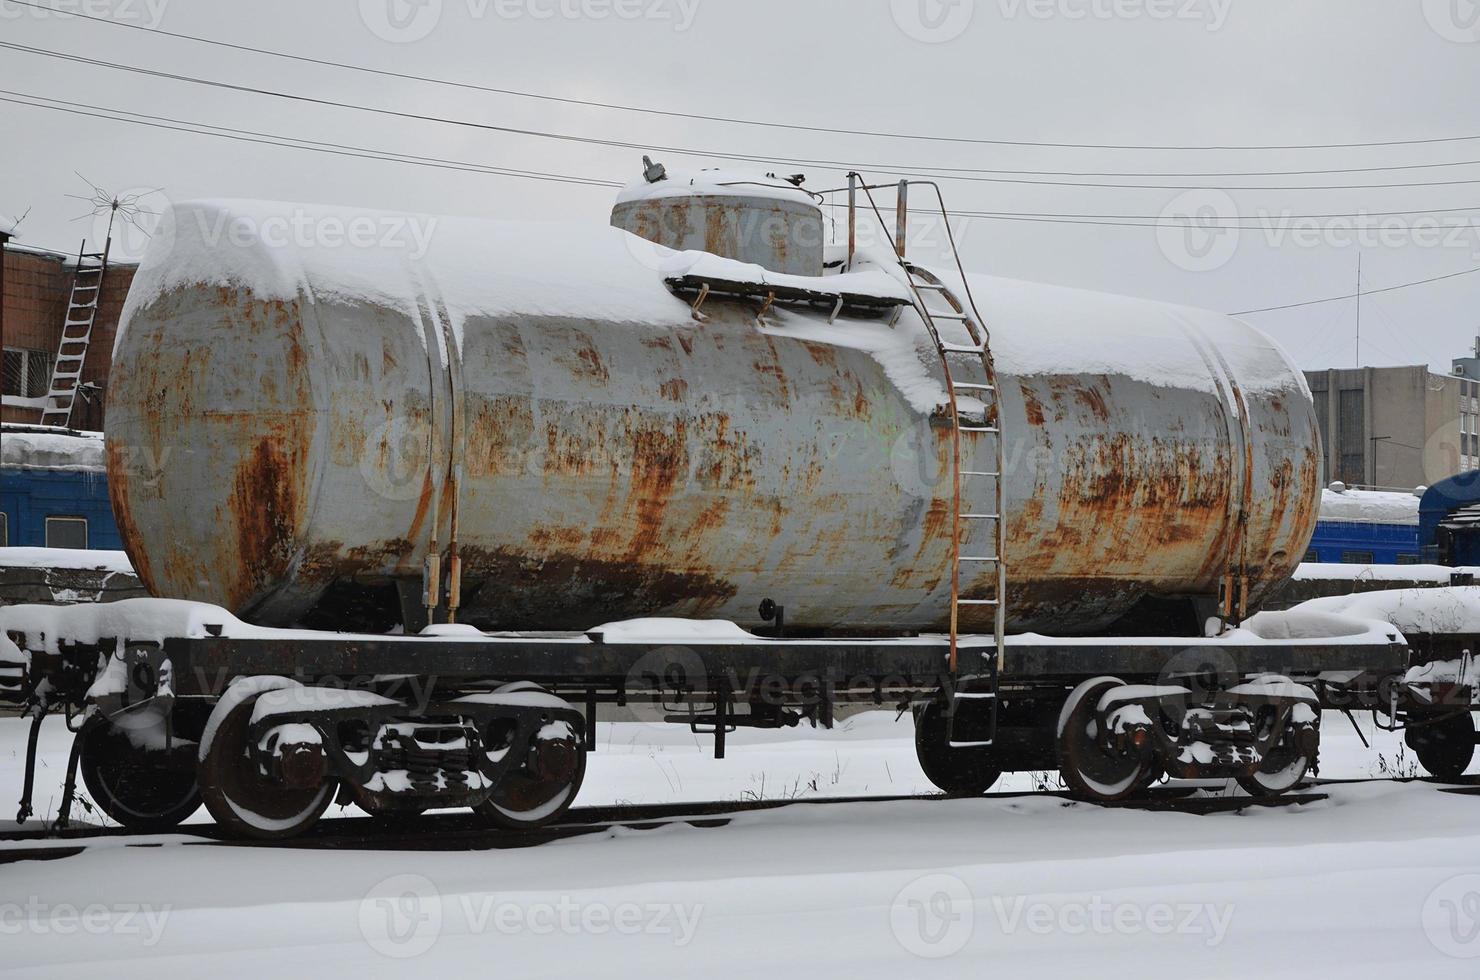 Parts of the snowy freight railcar photo